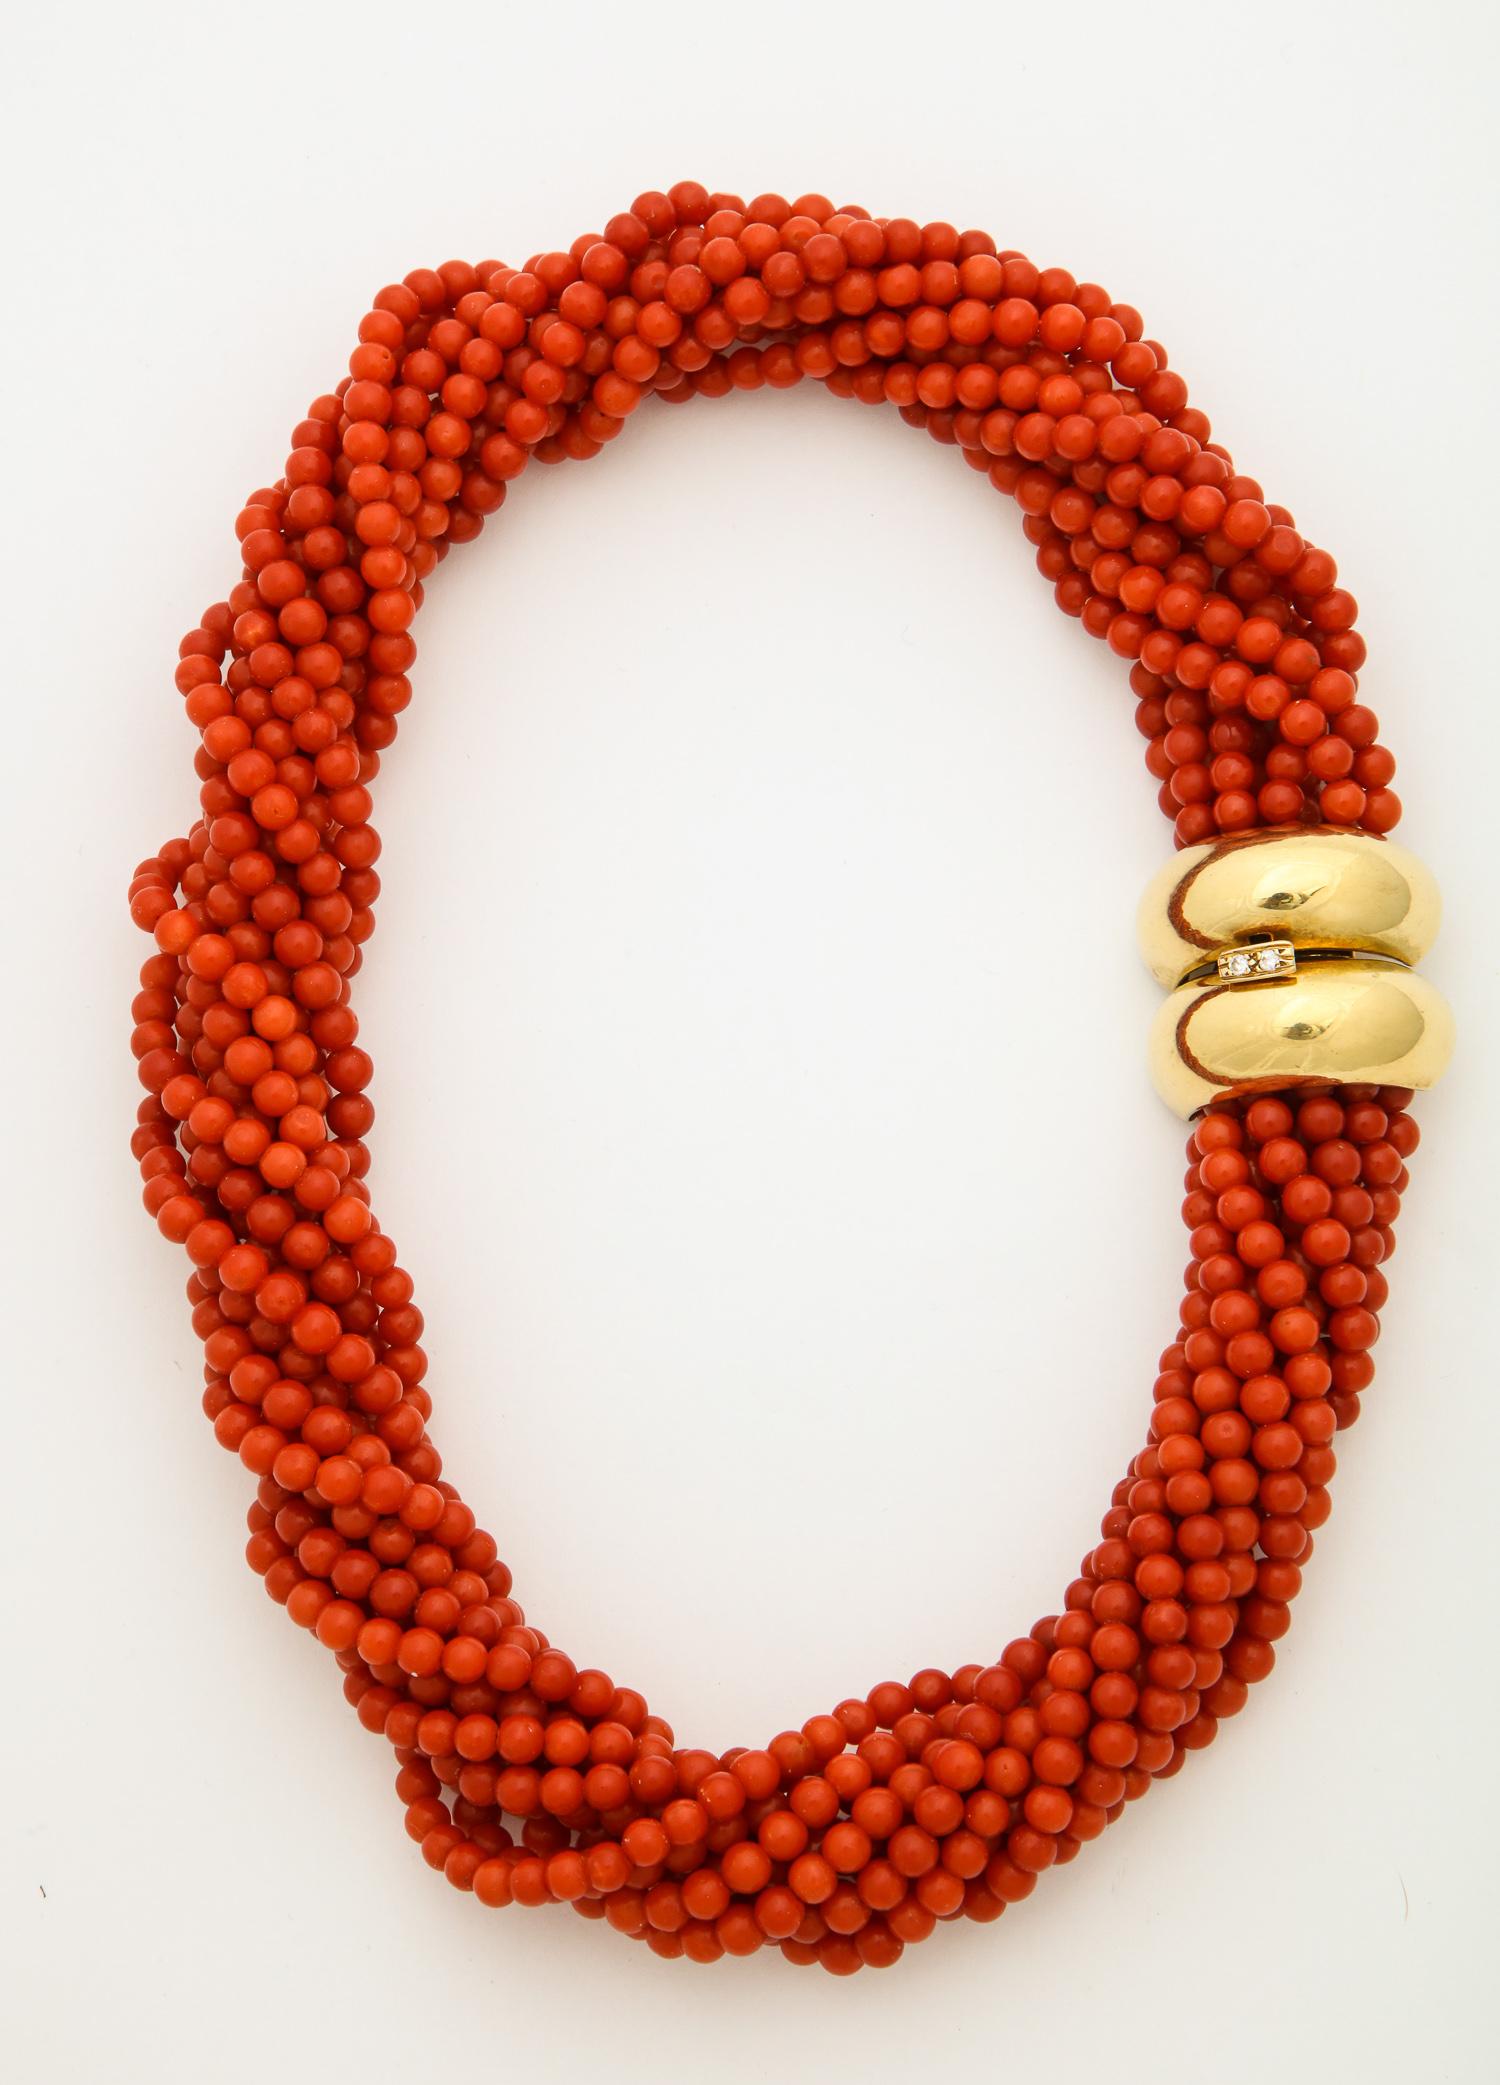 One Ladies Torsade Twist Necklace Consisting Of Eleven Strands Of Deep Orange Color Coral Beads.Beautifully Finished With An 18kt High Polish Yellow Gold Clasp Embellished With Teo Full Cut Diamonds. Created In The United States Of America In The